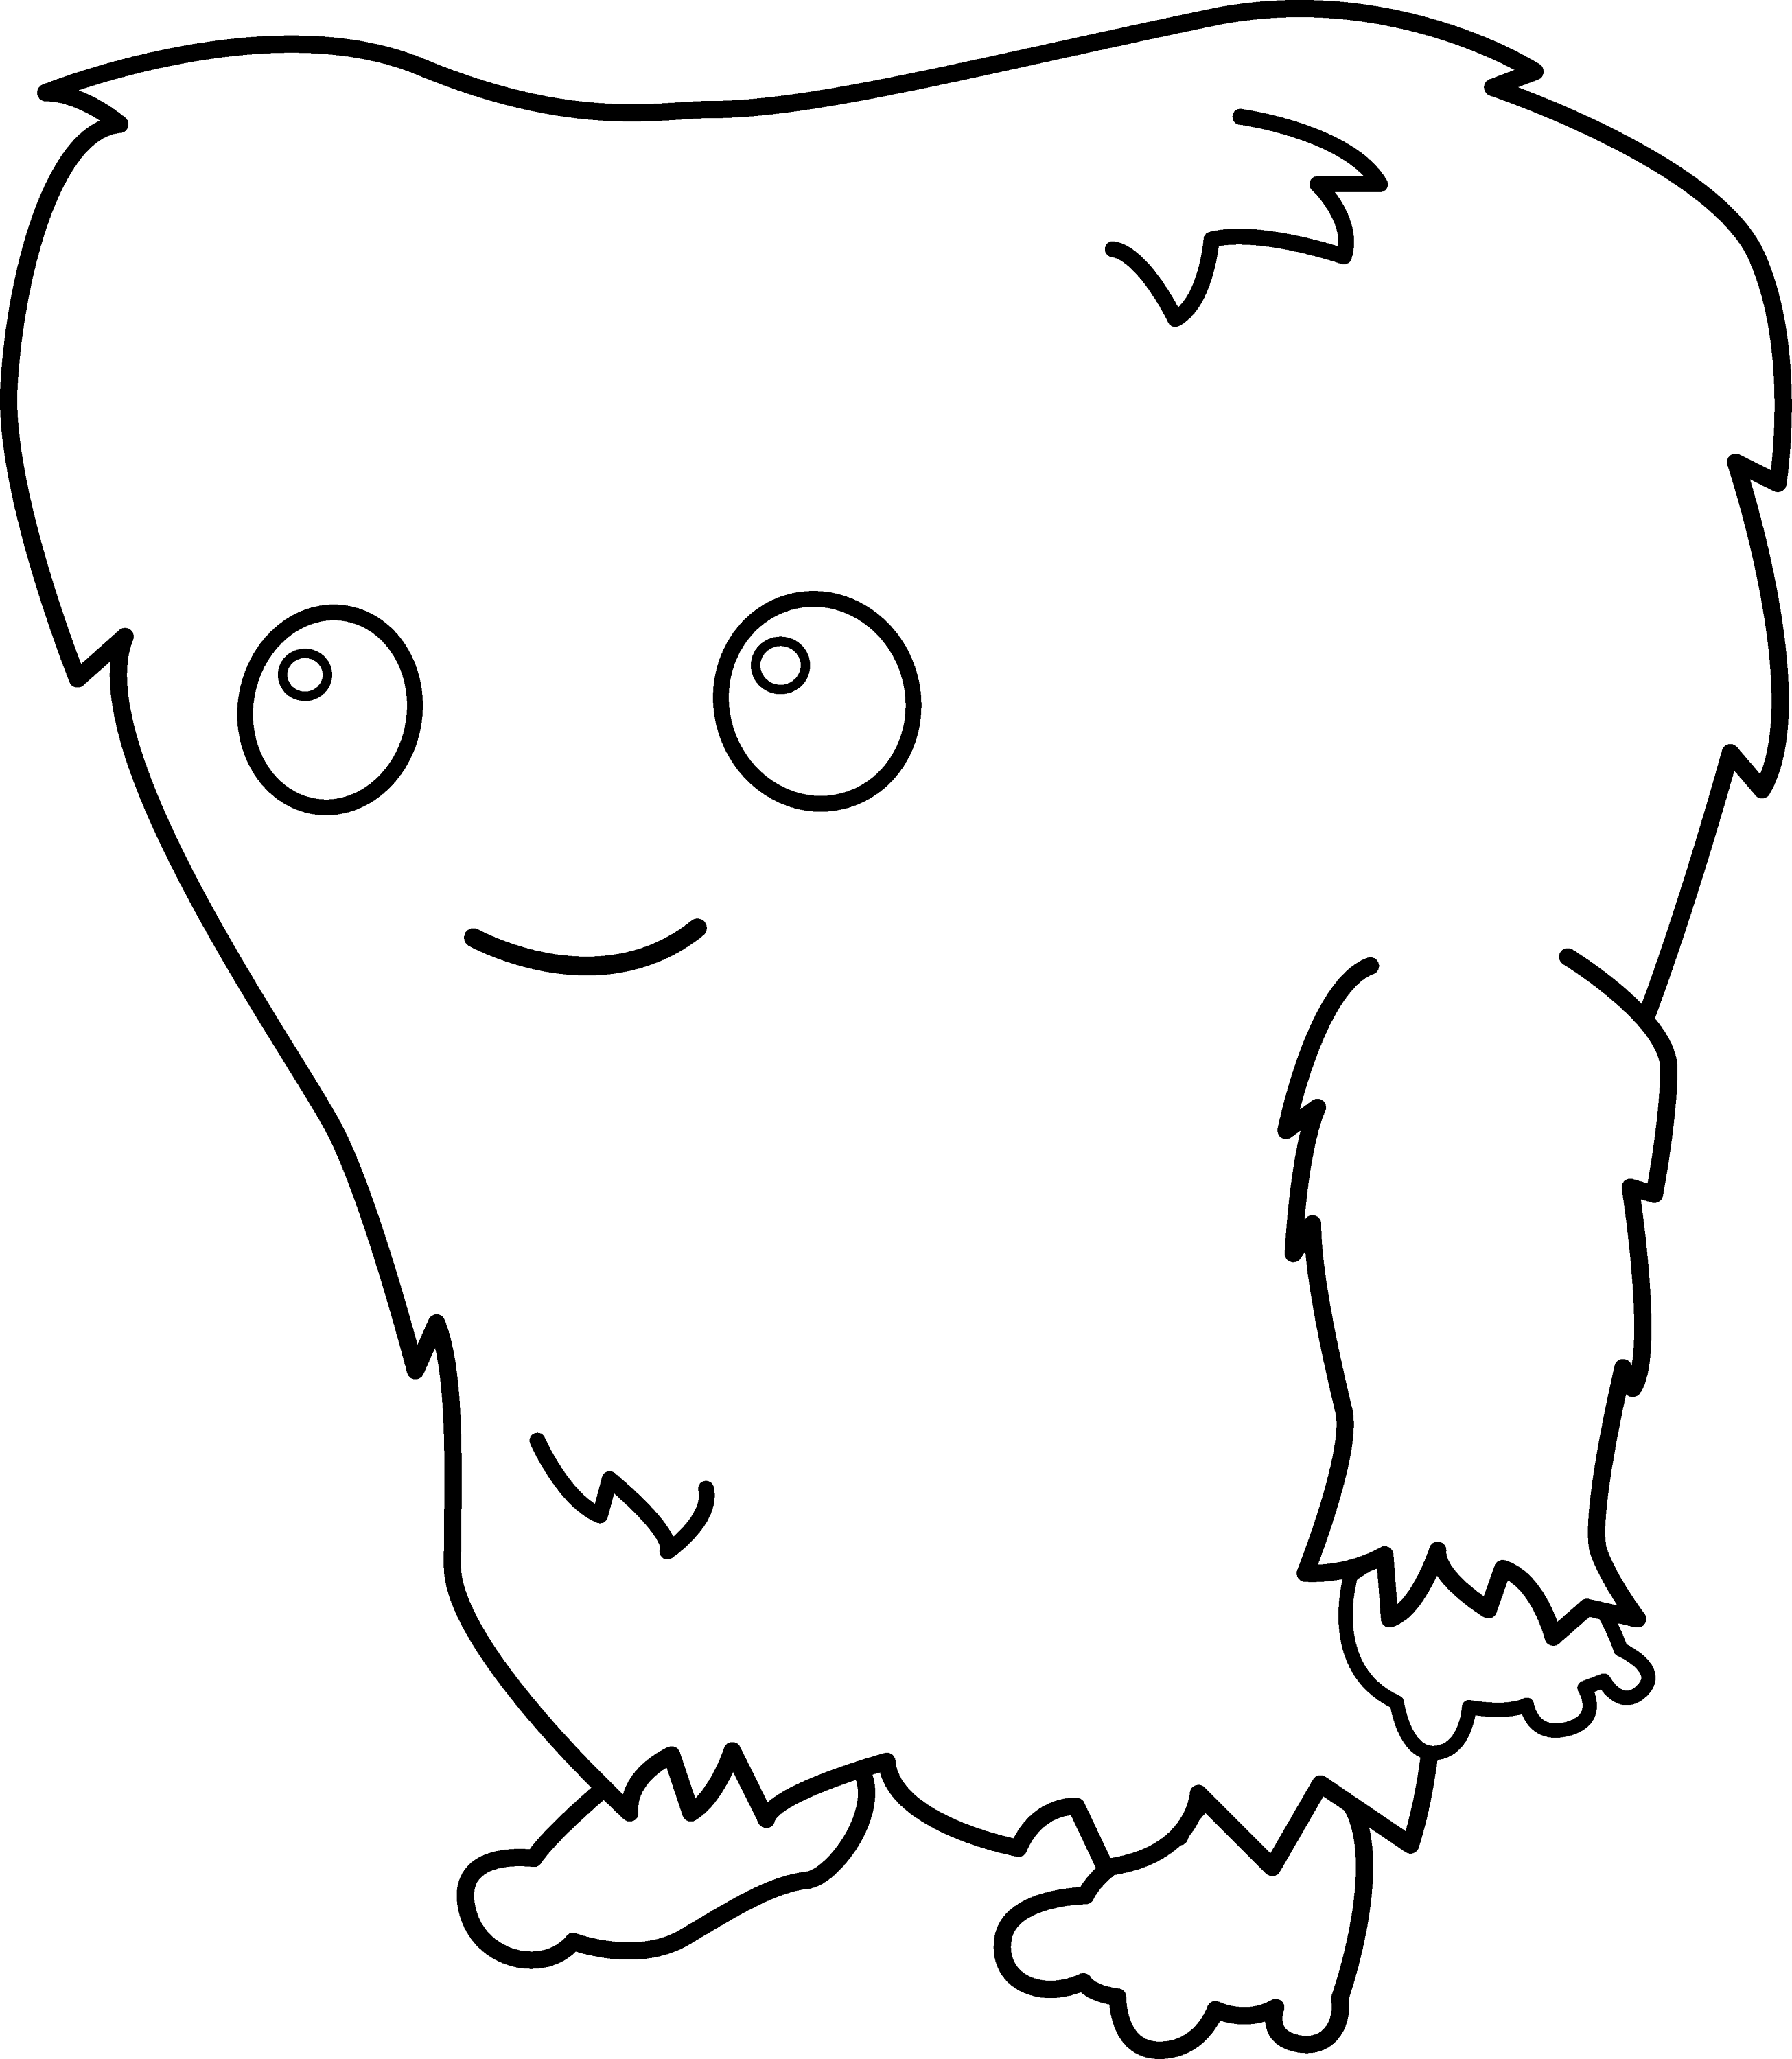 free black and white monster clipart - photo #21